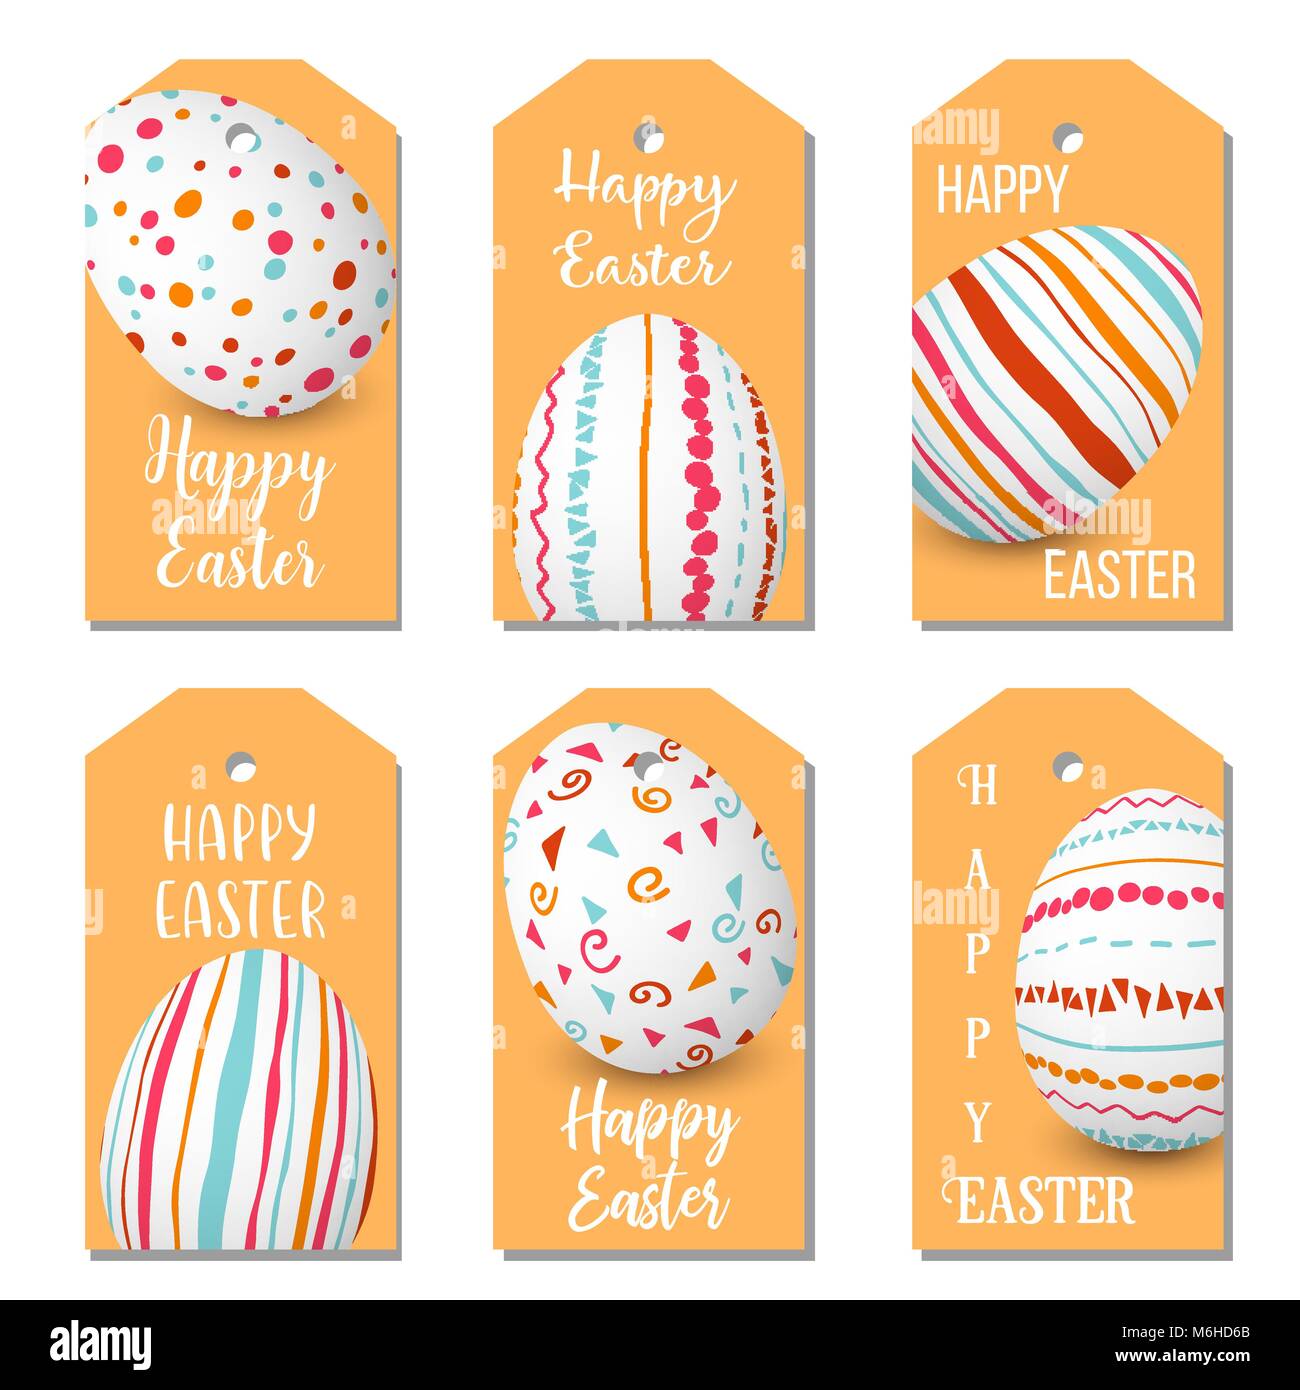 Happy Easter eggs golden labels set. 6 ribbon tags collection. colorful eggs designed as labels. Simple decorated ornaments. Stock Vector